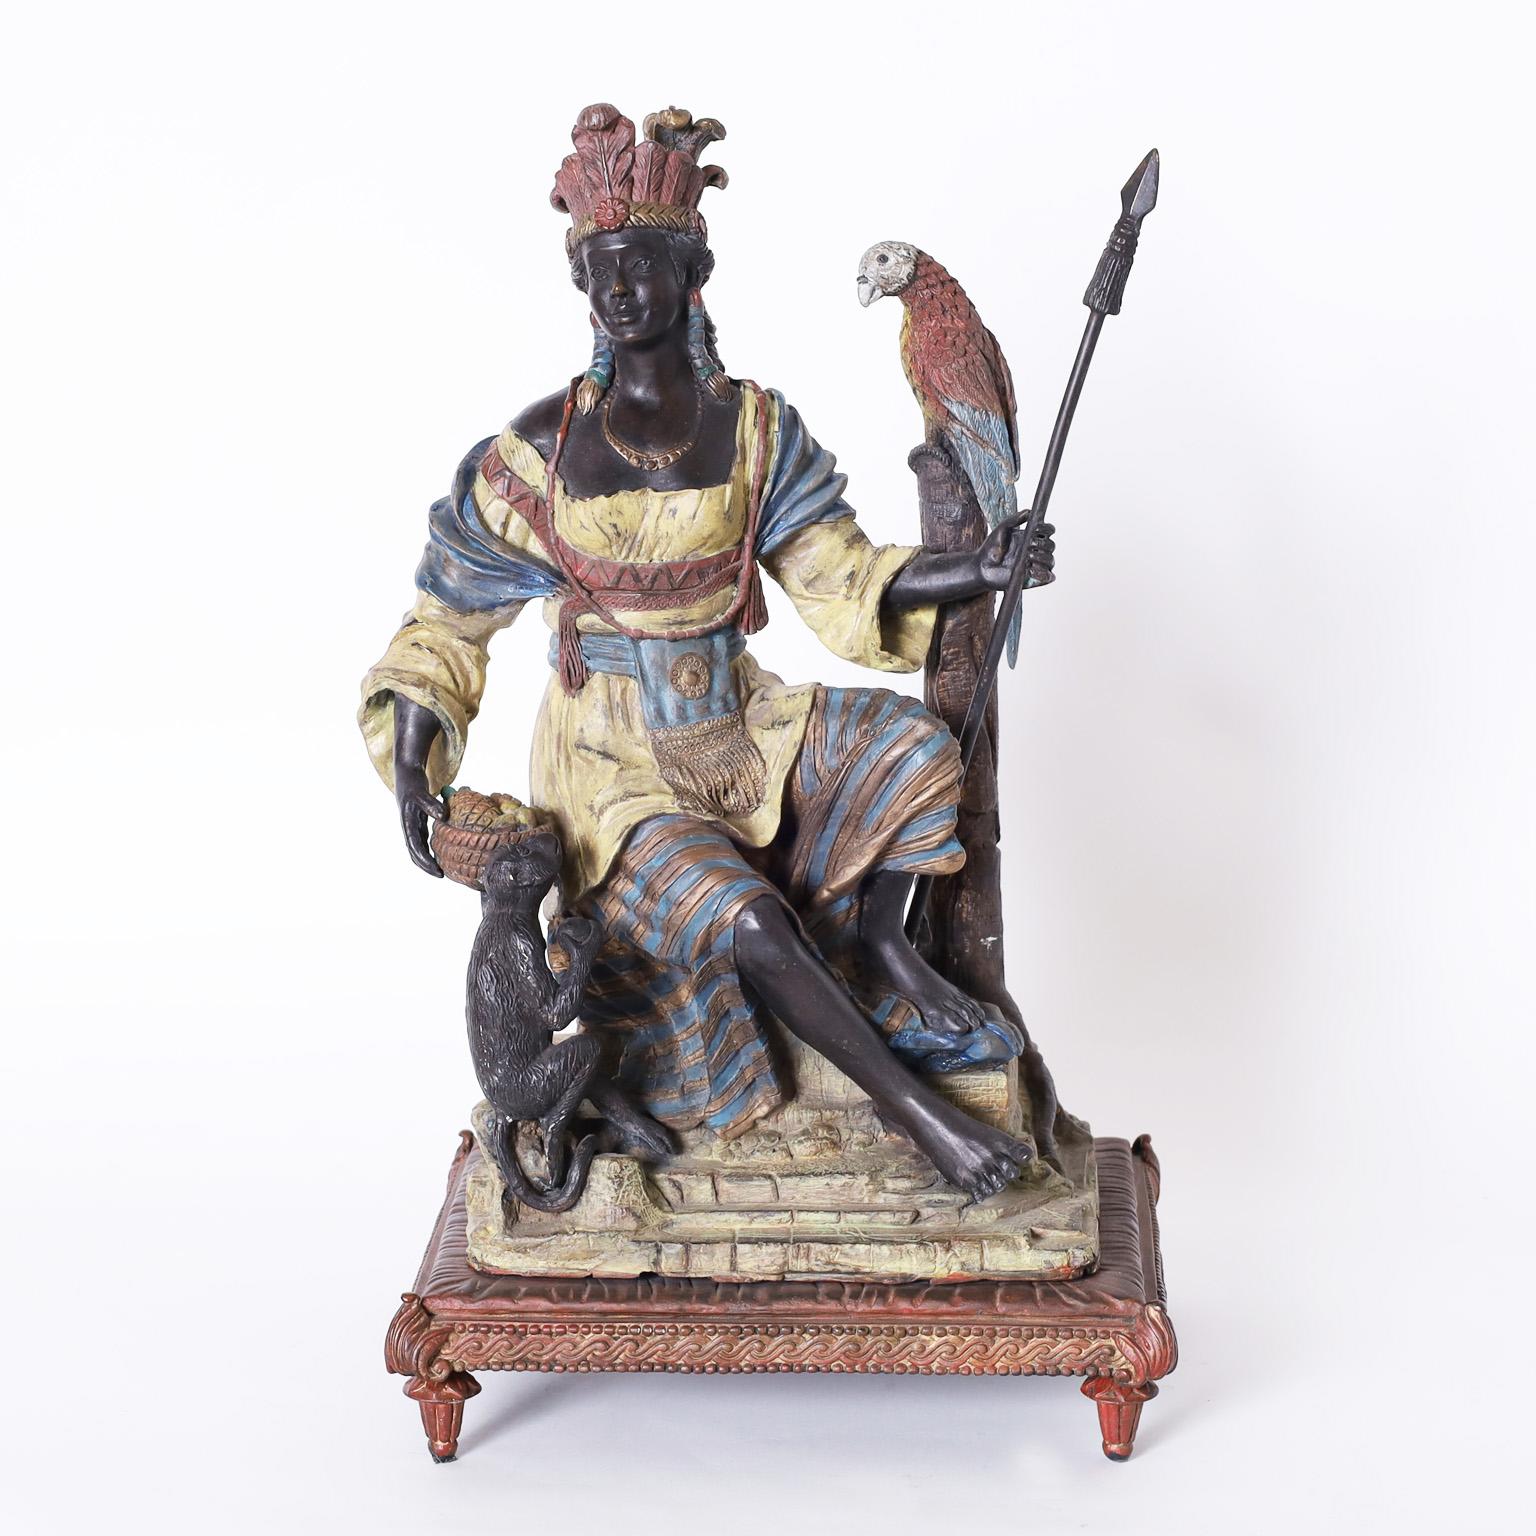 Antique orientalist bronze with an impressive composition depicting a female warrior with a spear, a parrot on a tree stump, and a monkey with a fruit bowl all with the original cold painted finish.